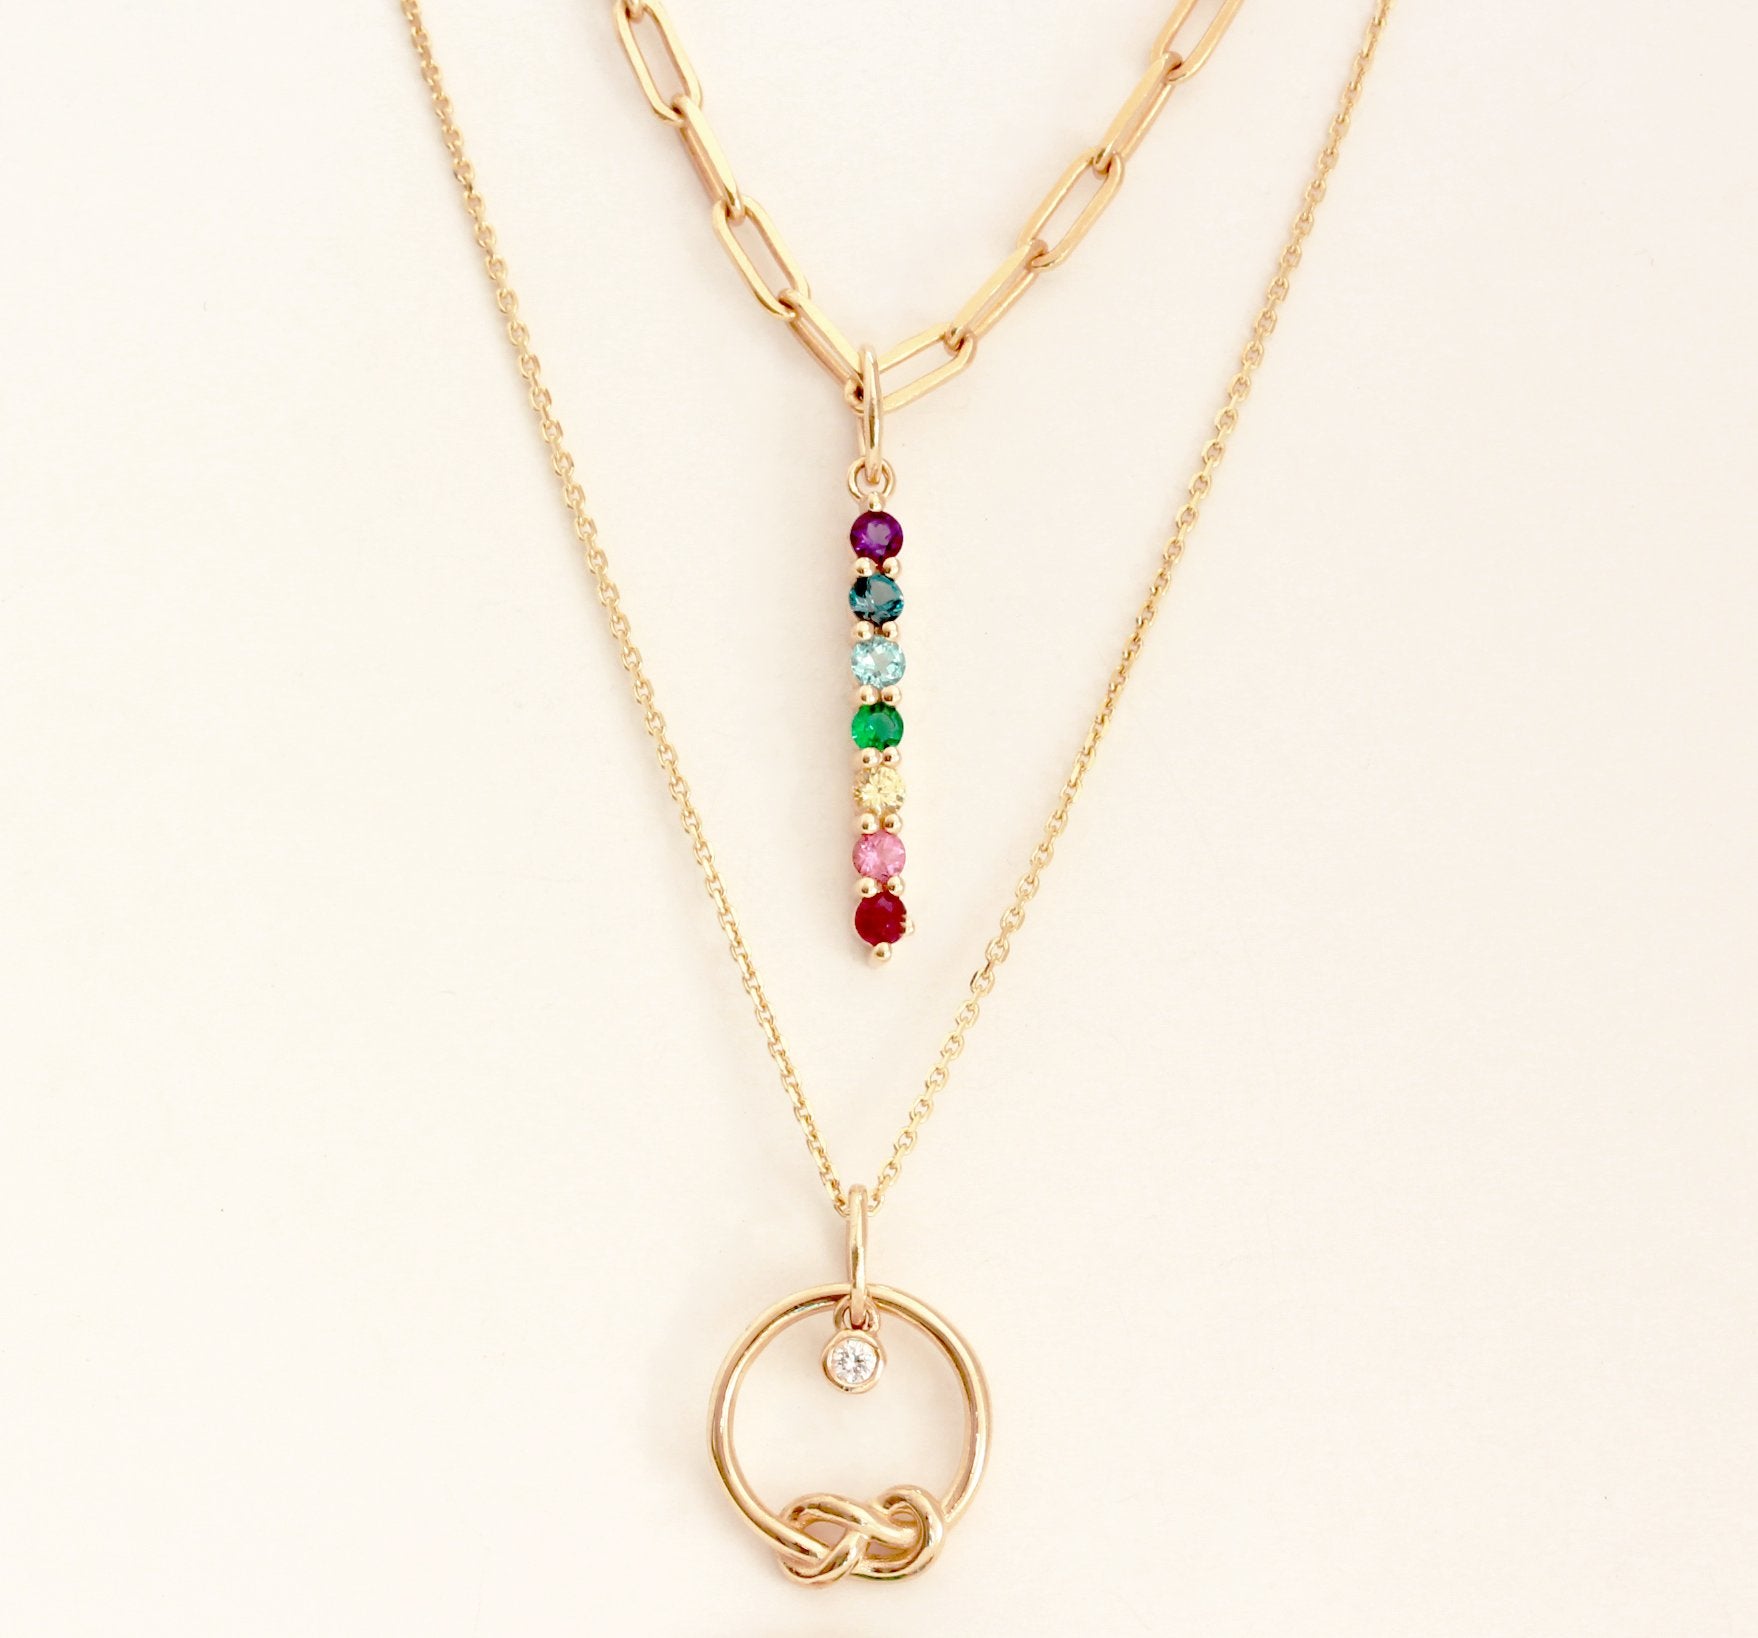 Infinity Knot Birthstone Pendant Necklace - 14K Yellow Gold, READY TO SHIP!